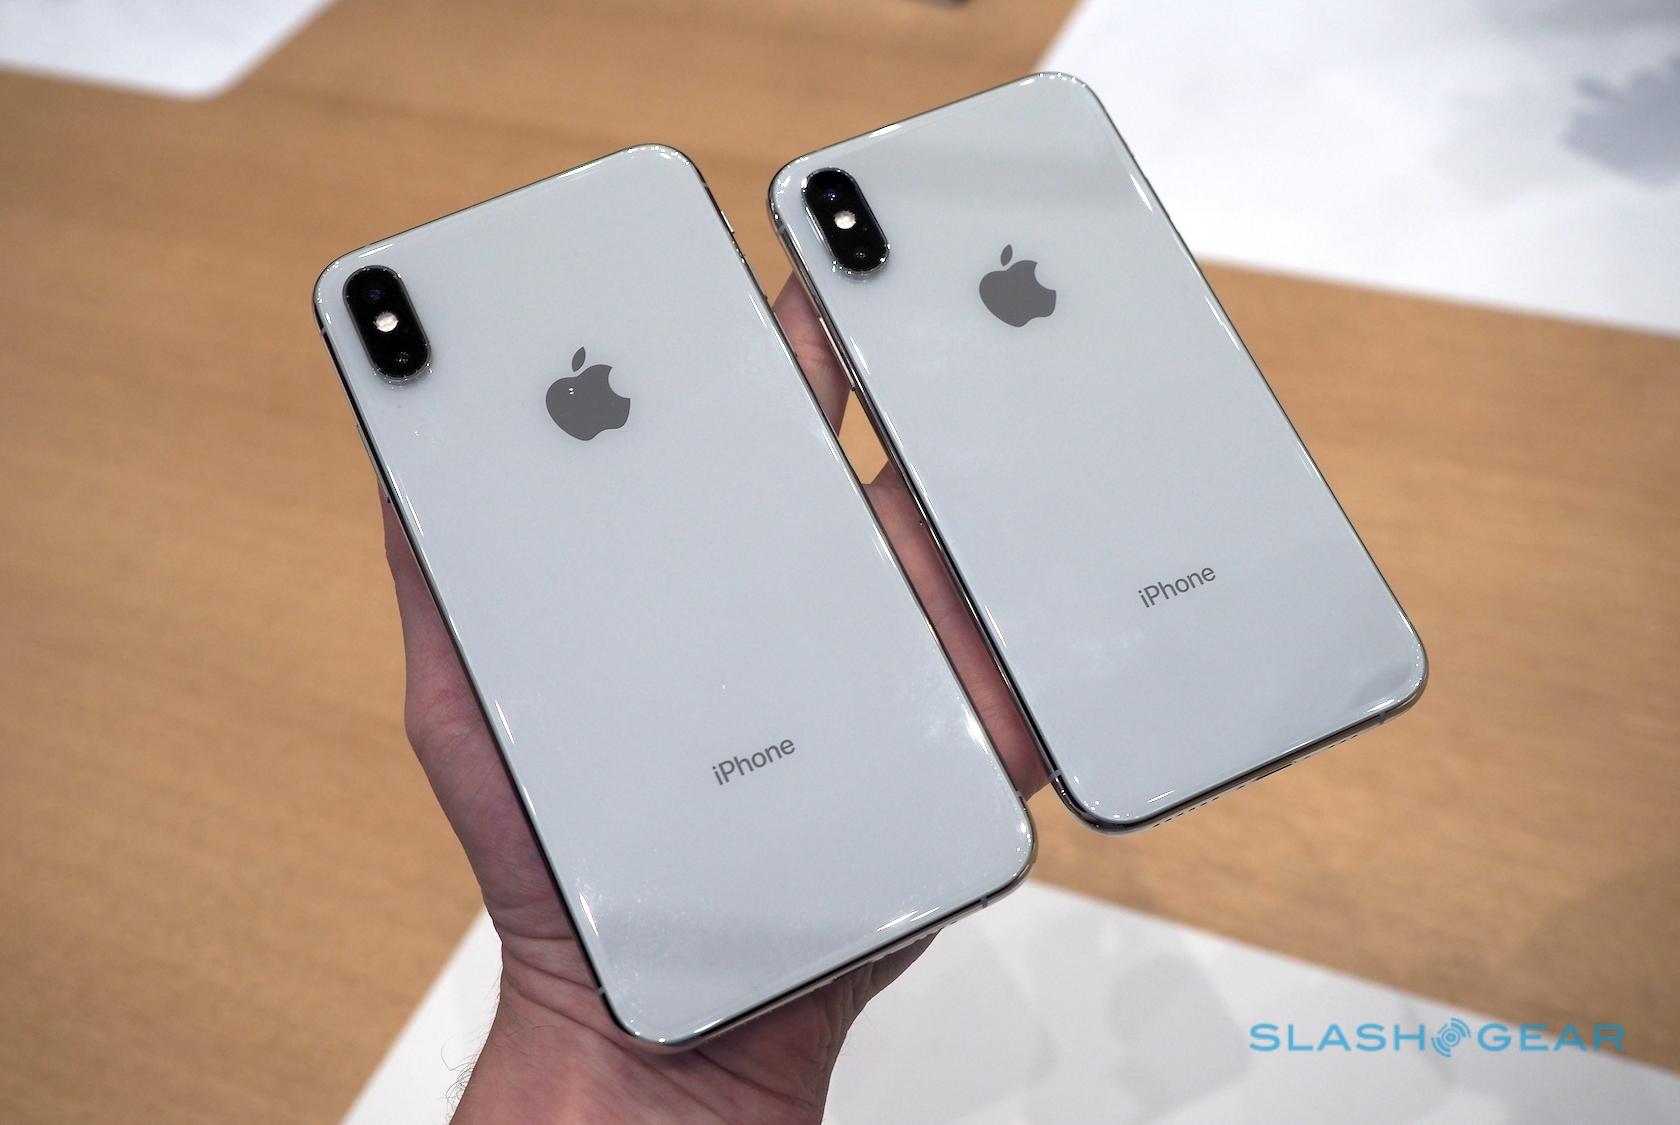 iPhone Xs, Xs Max, XR battery sizes revealed ahead of